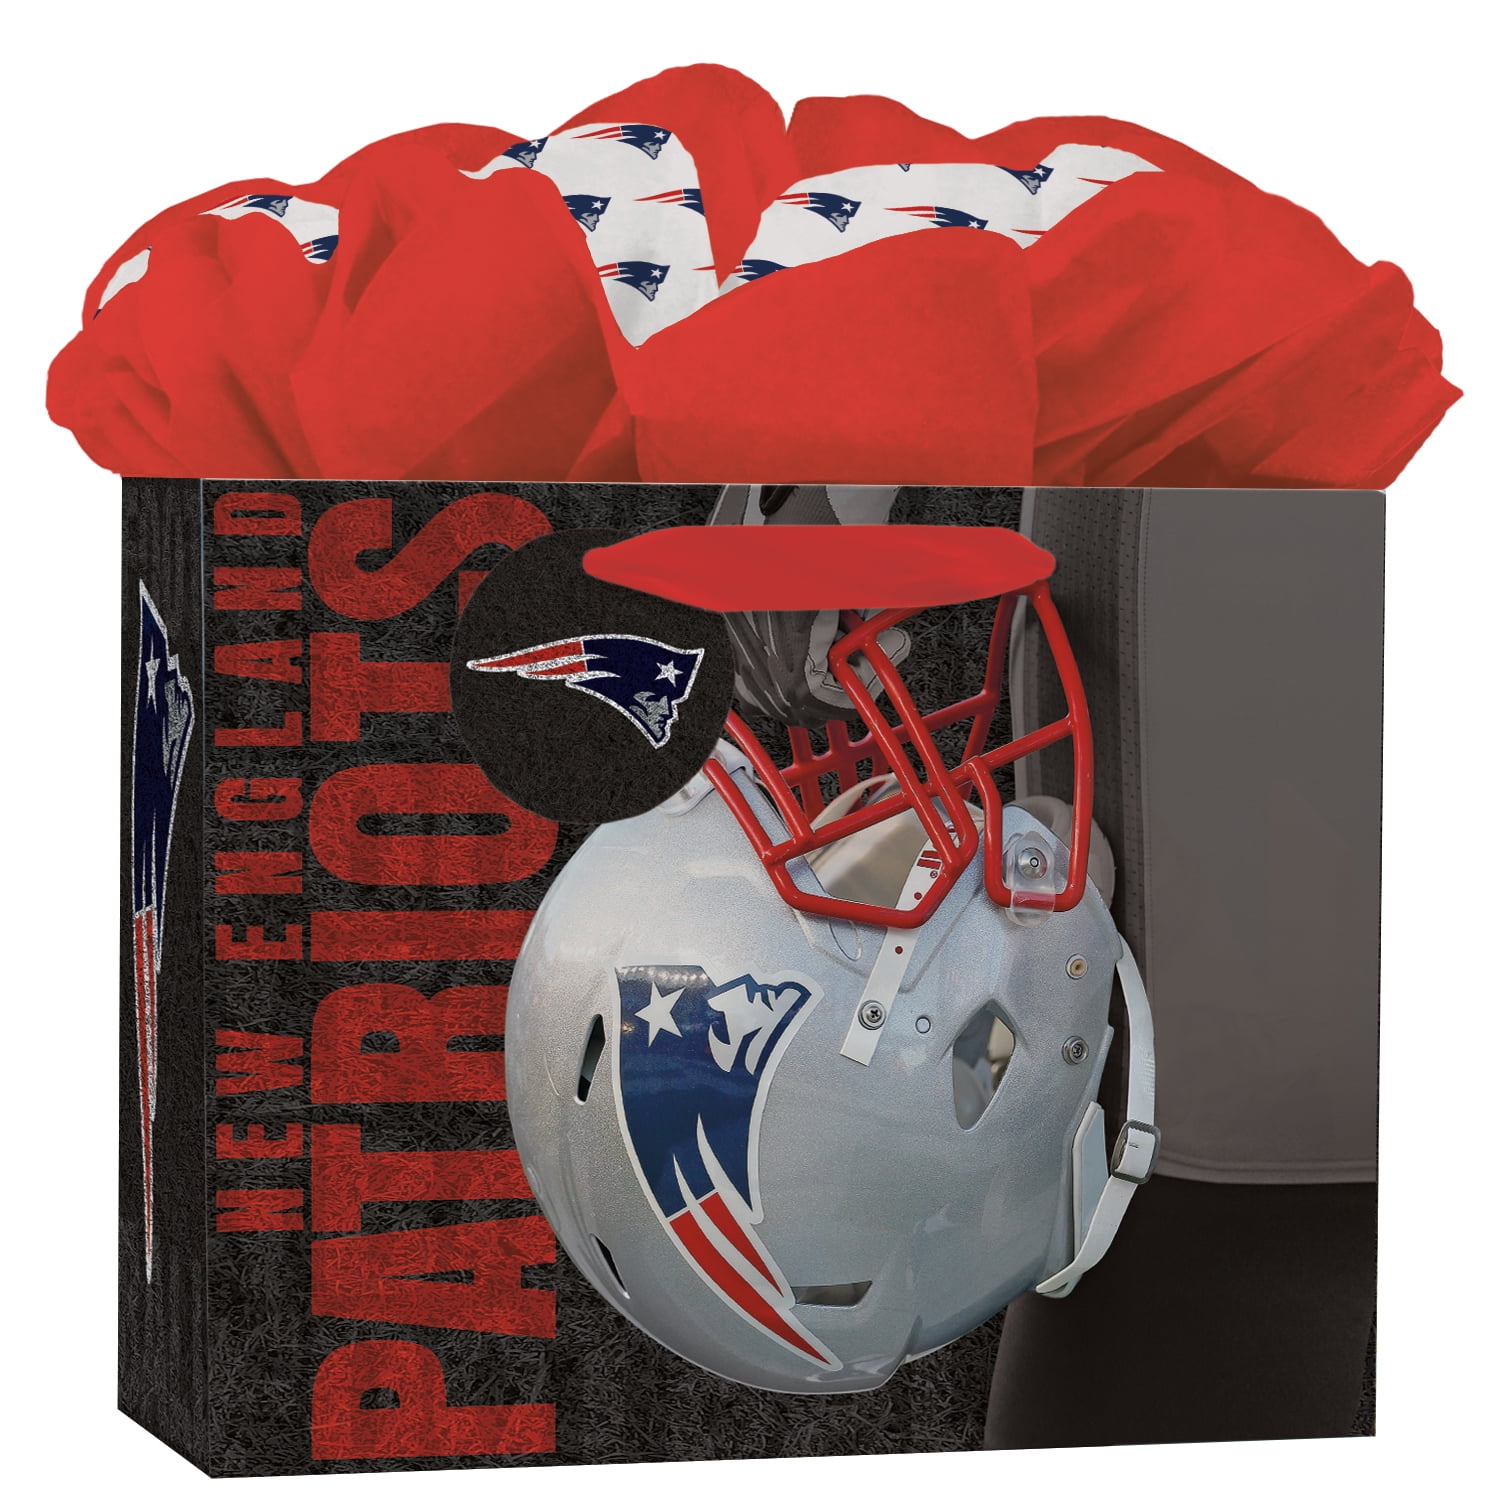 Gogo Gift Bag All In One New England Patriots Medium Tissue Paper Included!